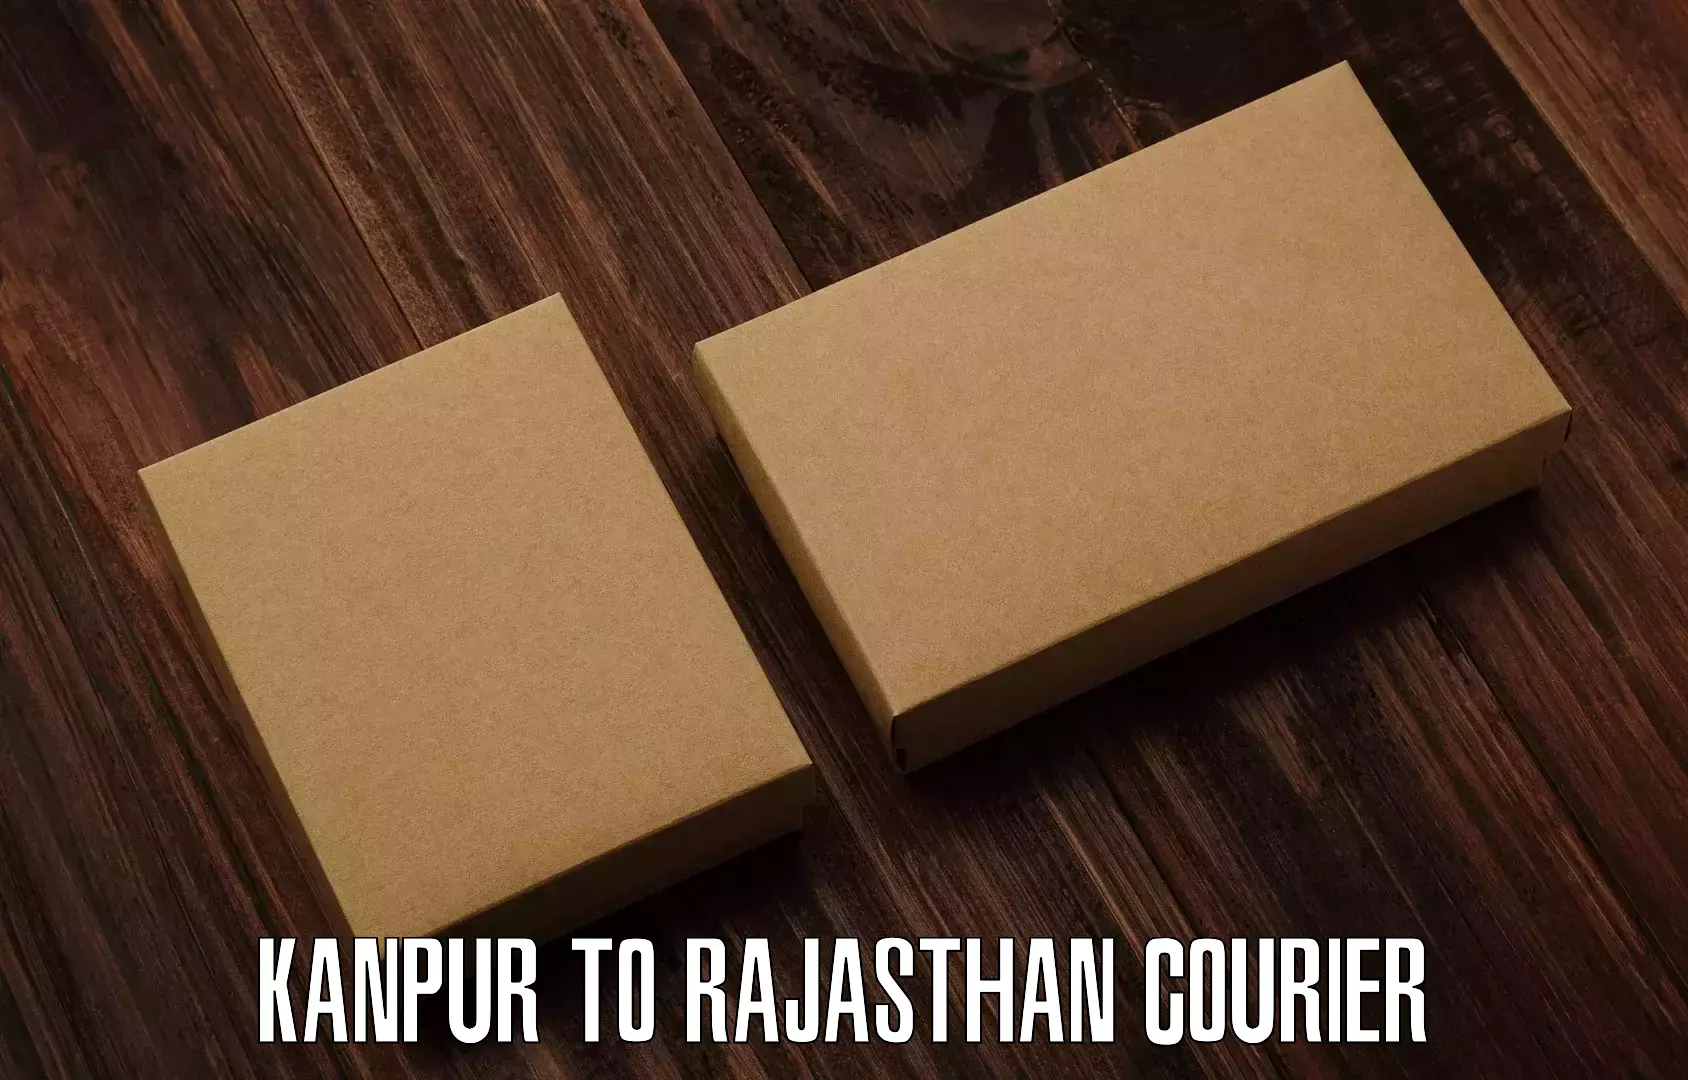 Cost-effective courier options Kanpur to Kotputli